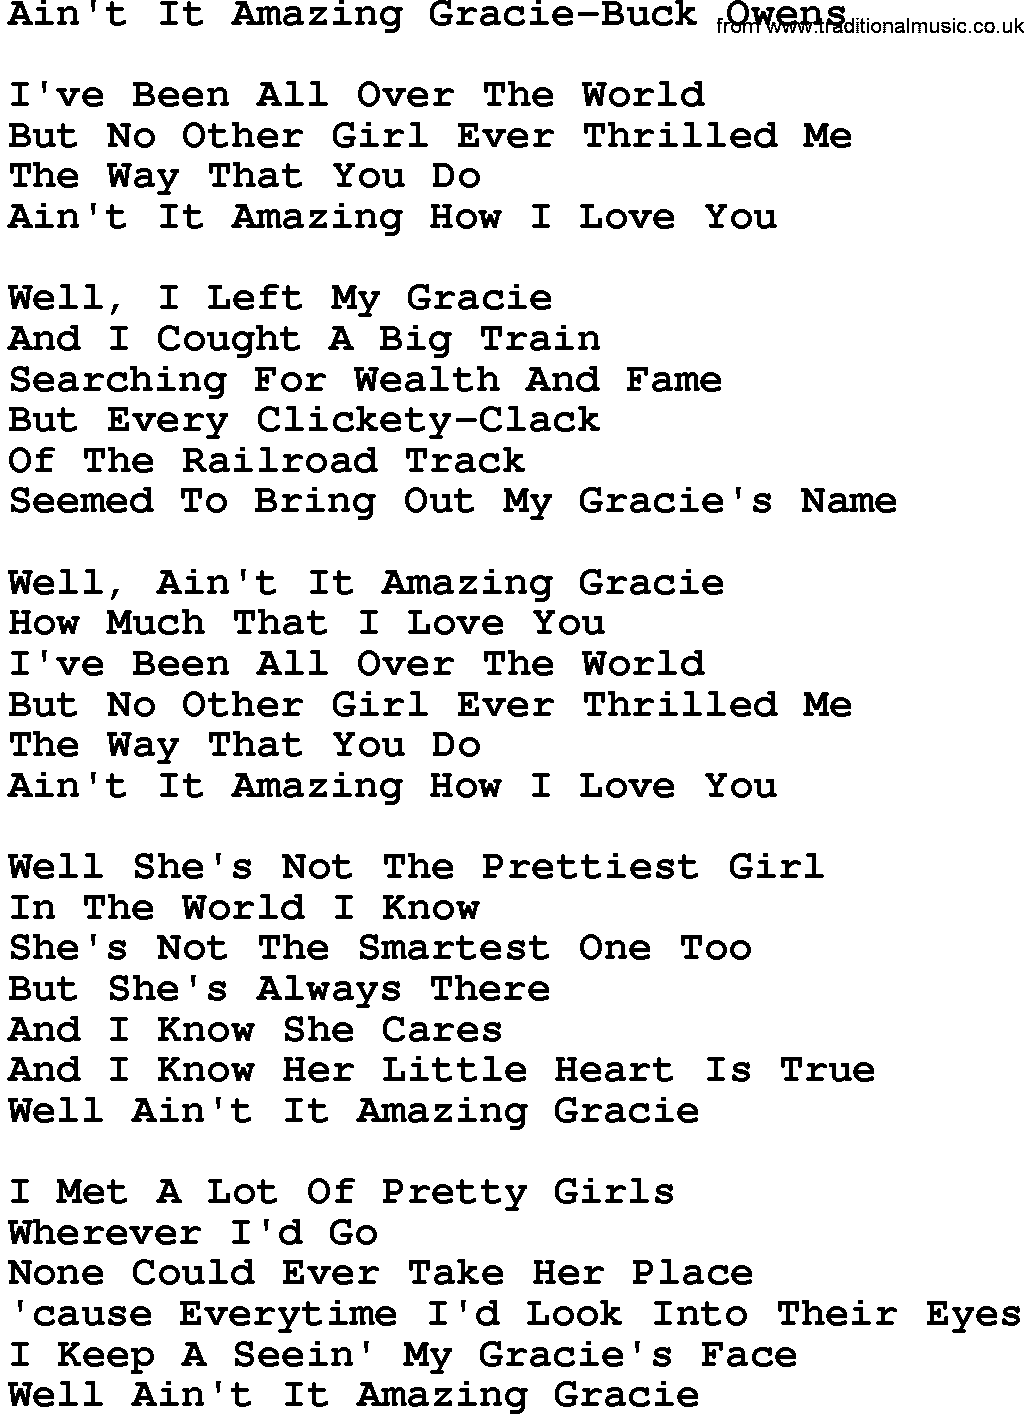 Country music song: Ain't It Amazing Gracie-Buck Owens lyrics and chords